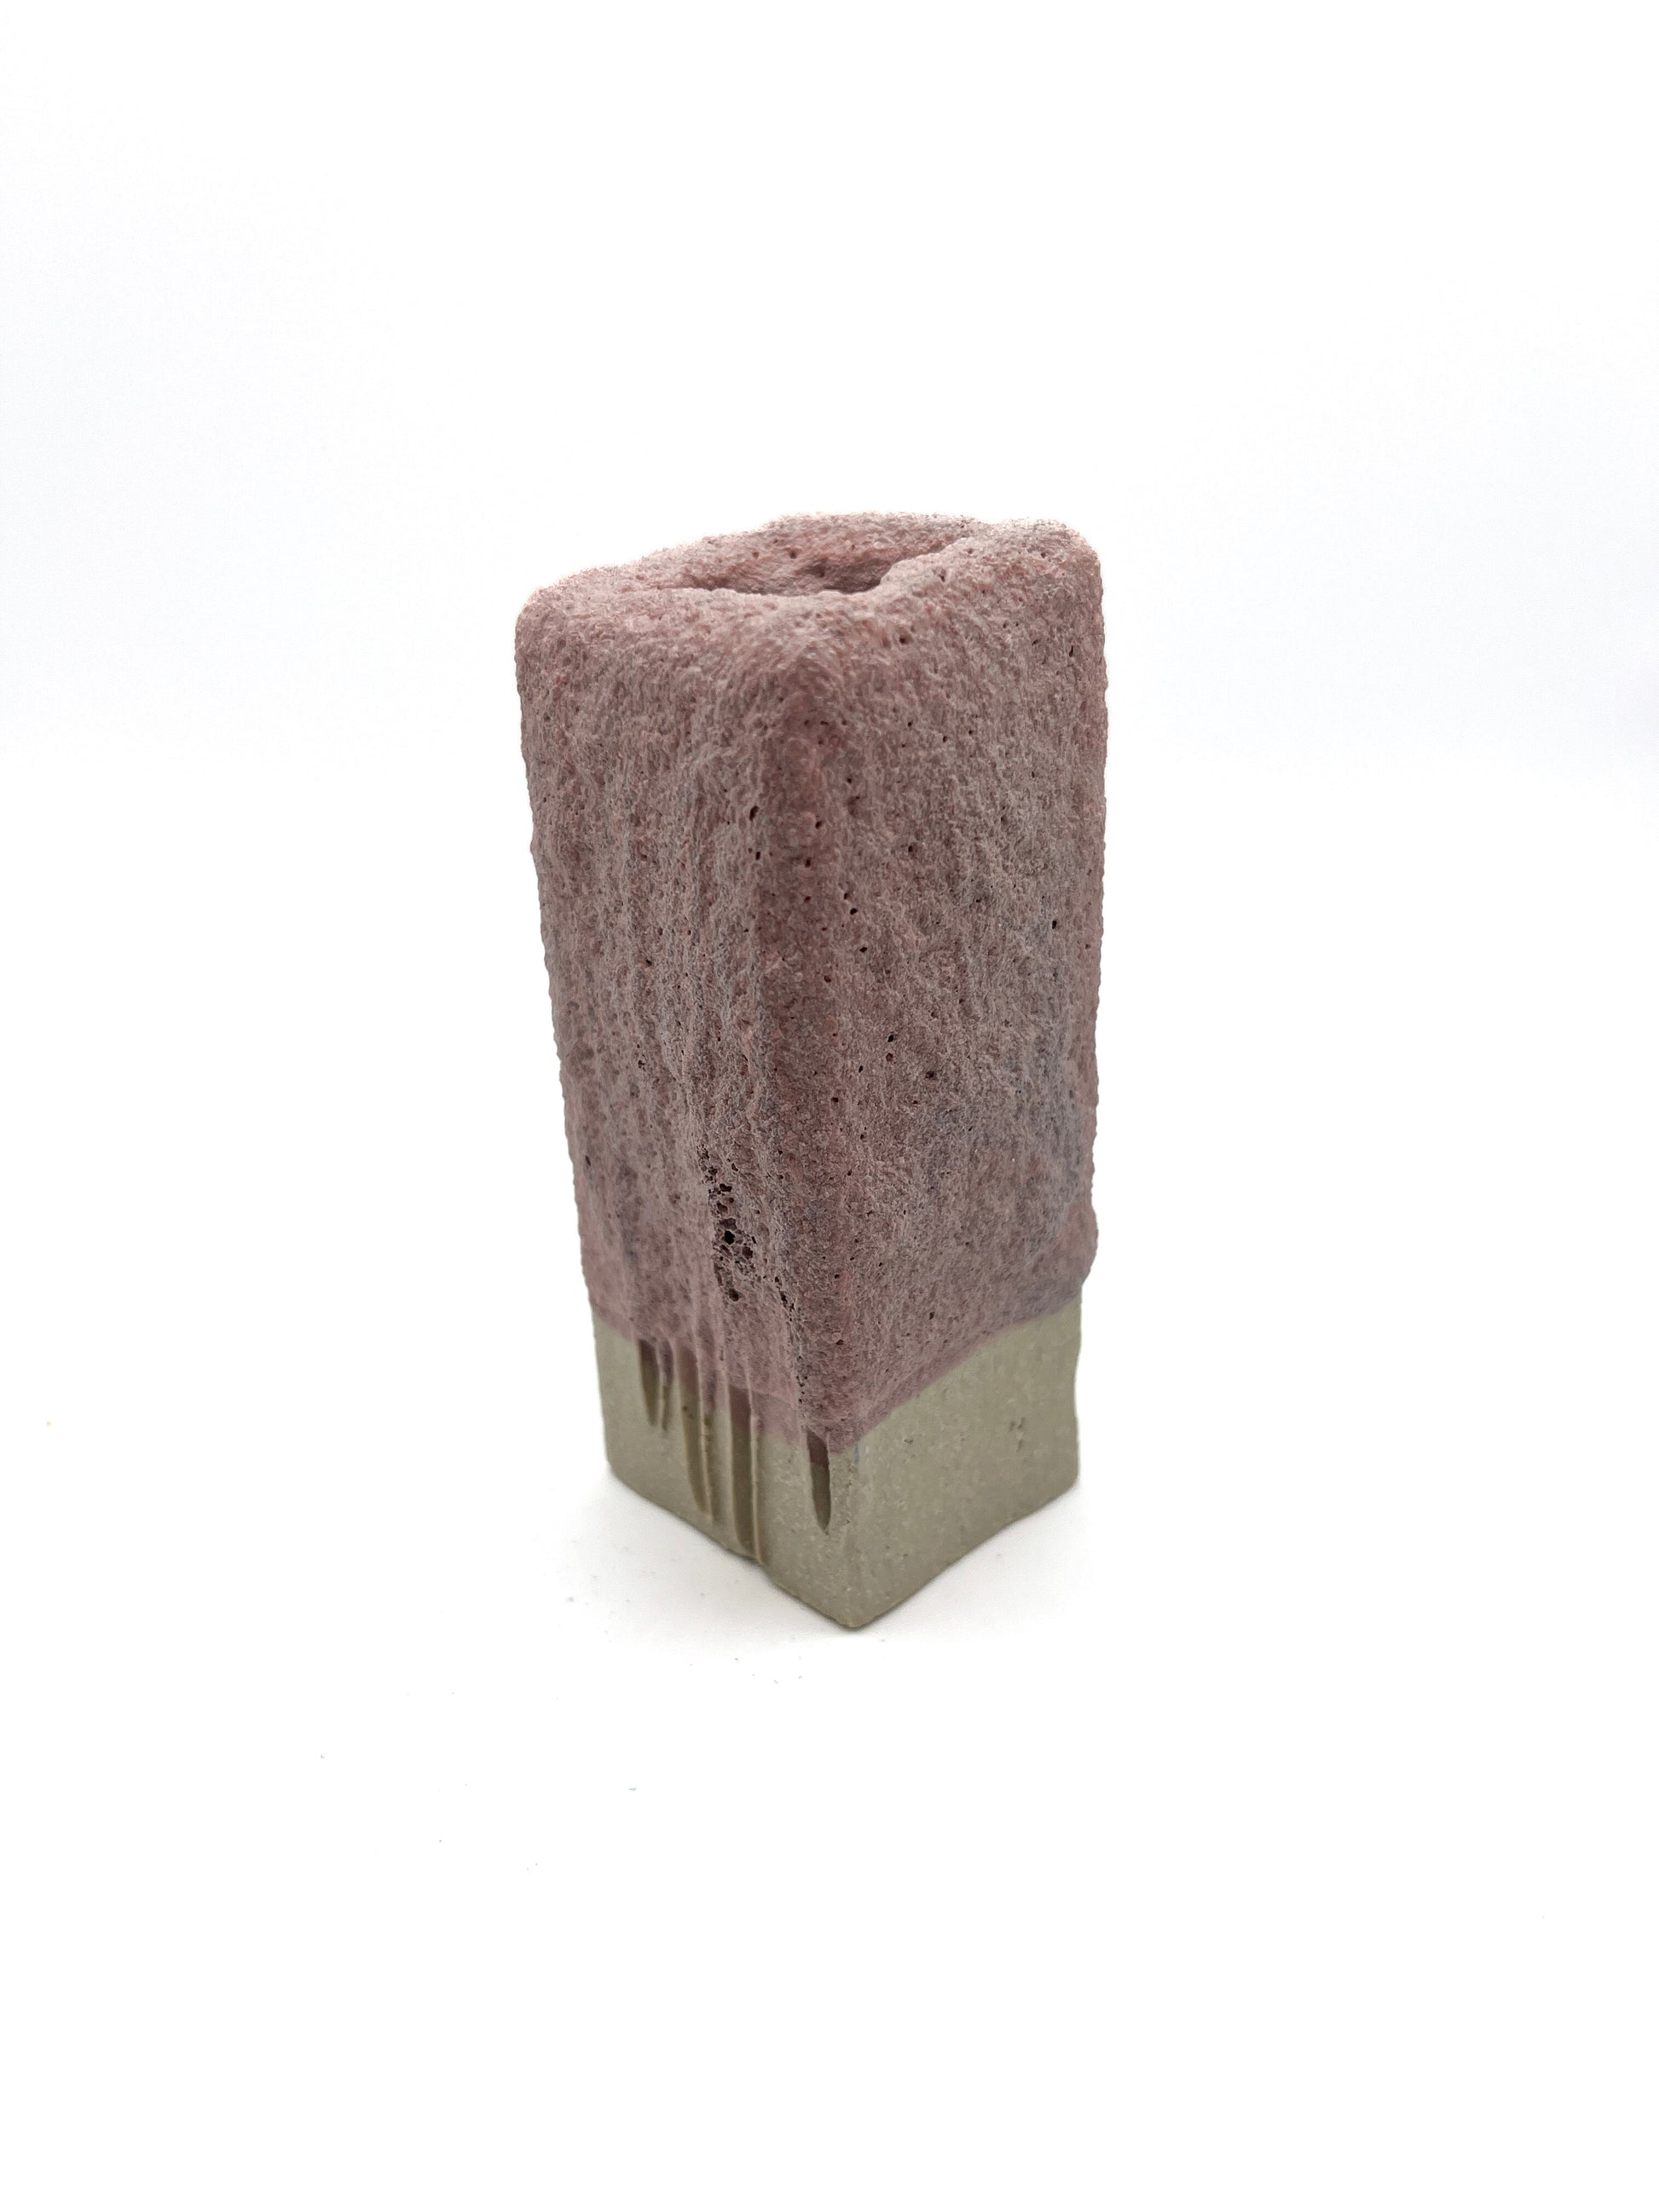 Fired test column for pink mini-puff glaze on light clay. Fuzzy texture when fired to cone 5 or 6.